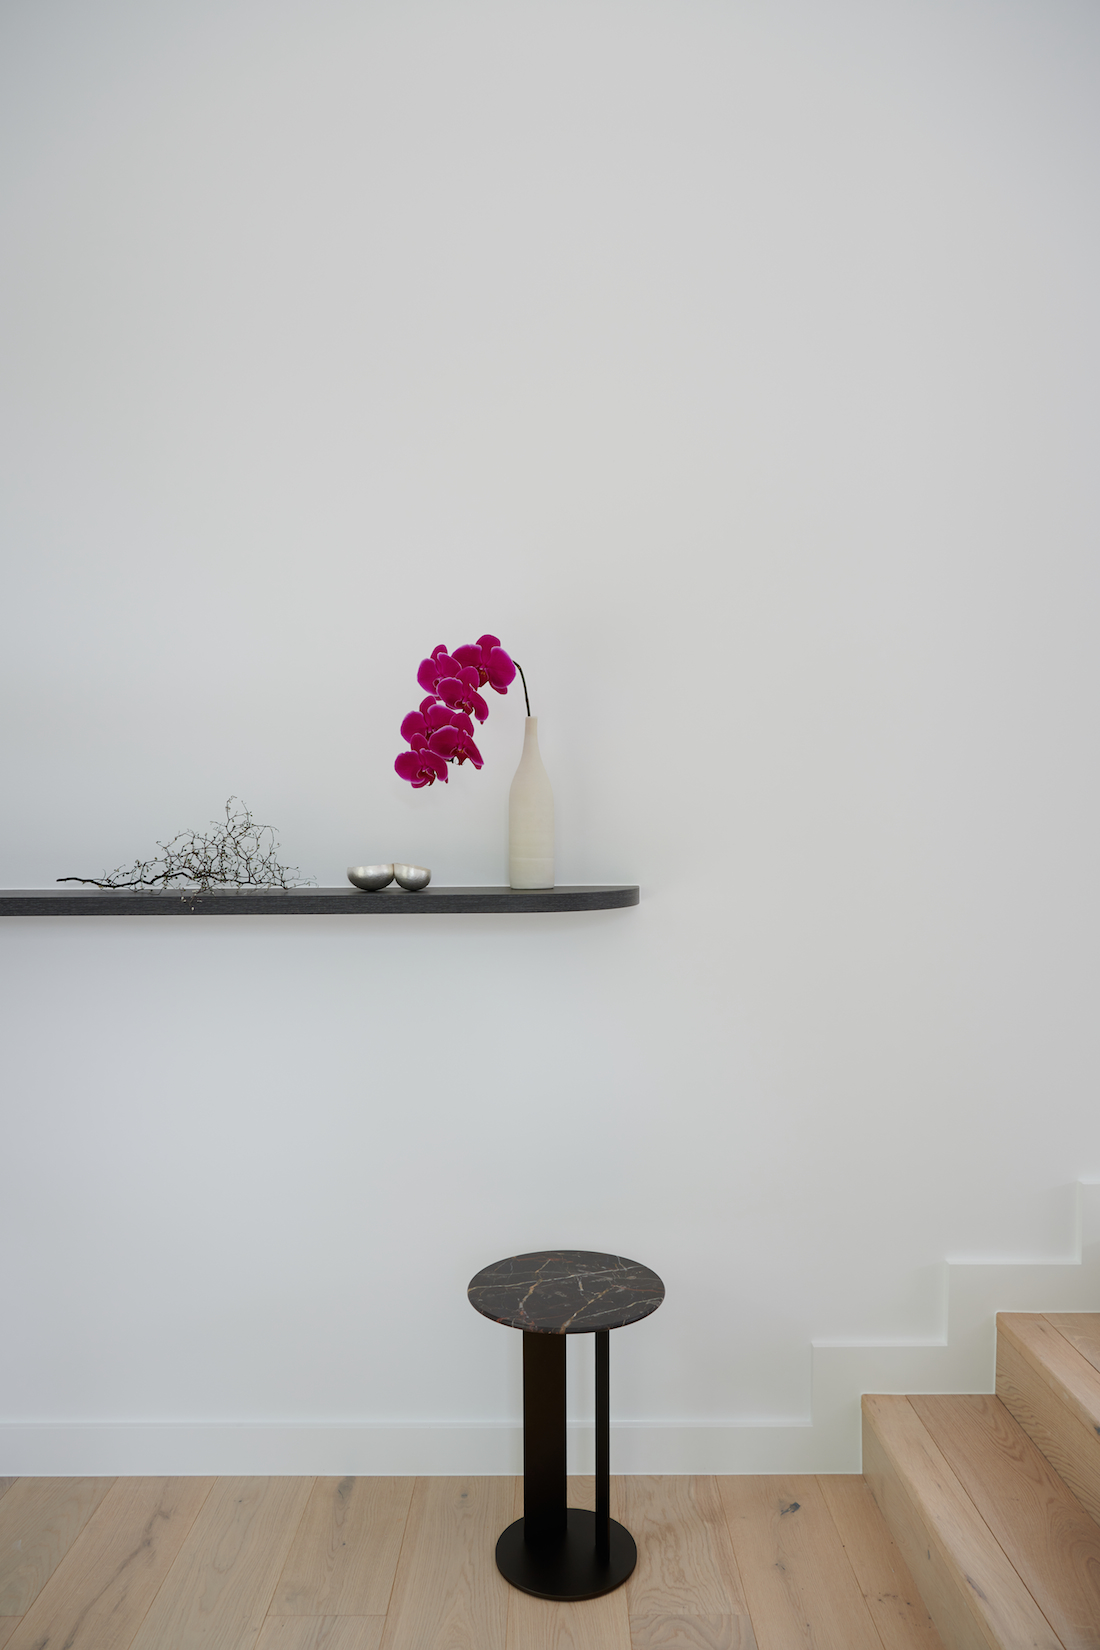 Alexi George hallway styling on simple floating shelf joinery perfection